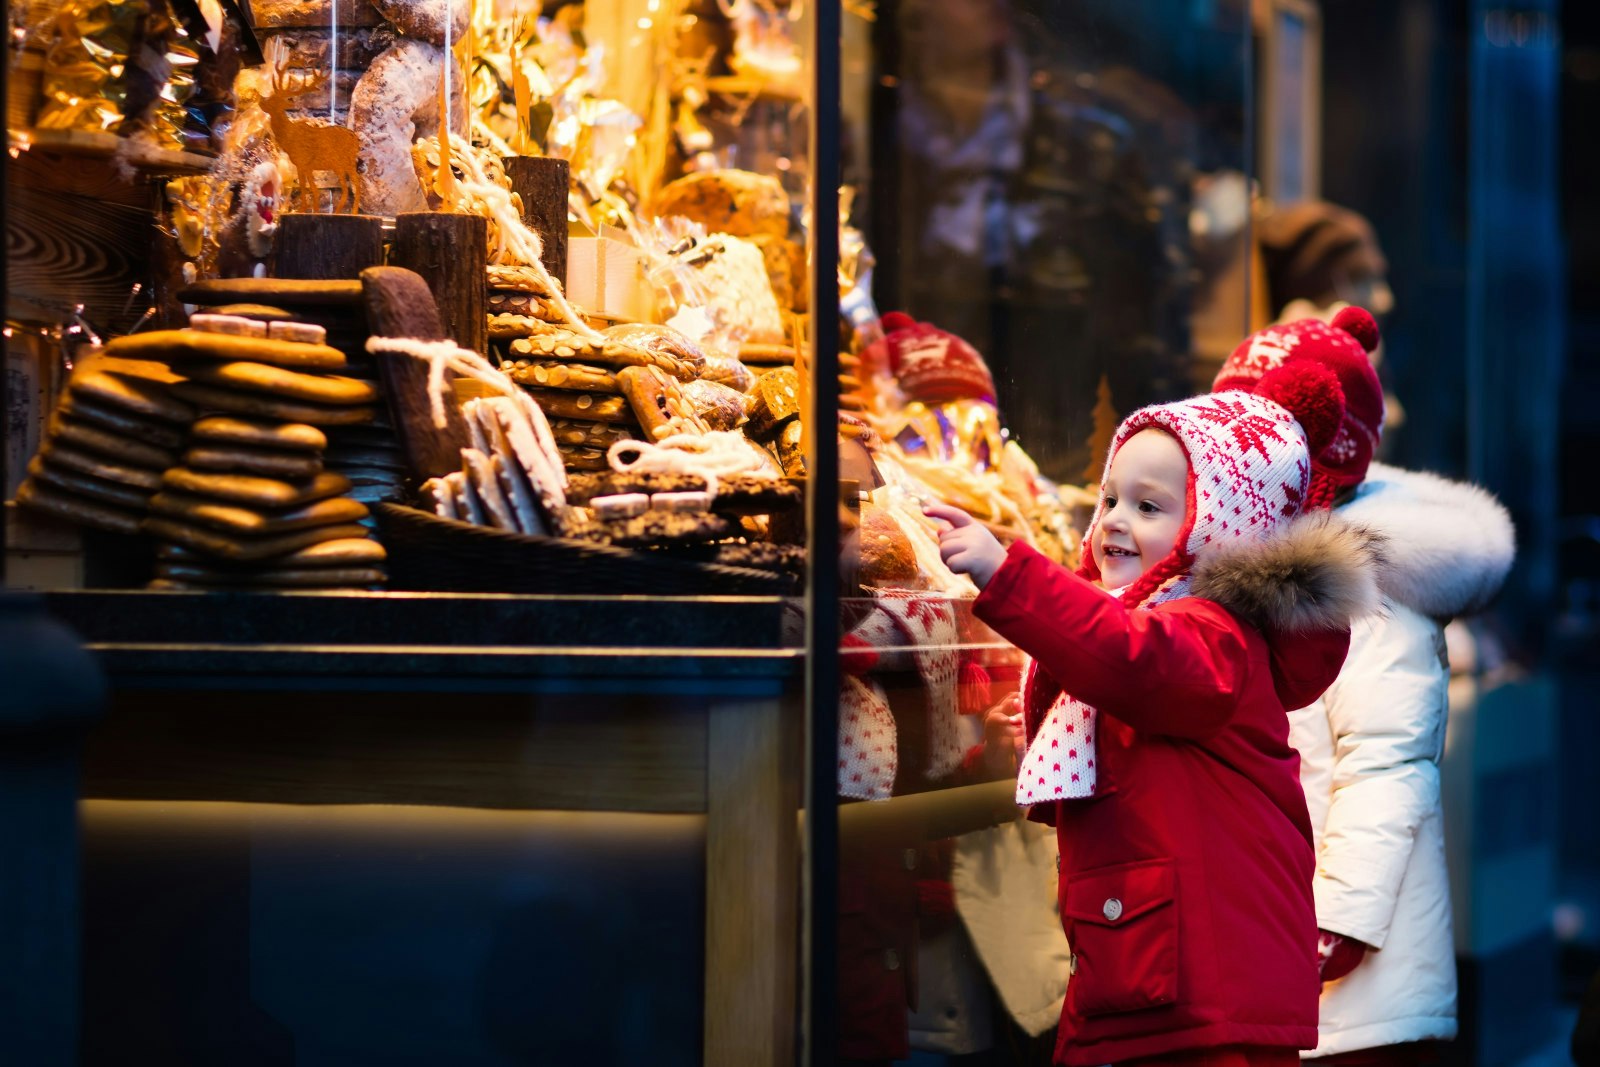 A smiling toddler points to an illuminated display of cakes and pastries at a Christmas market